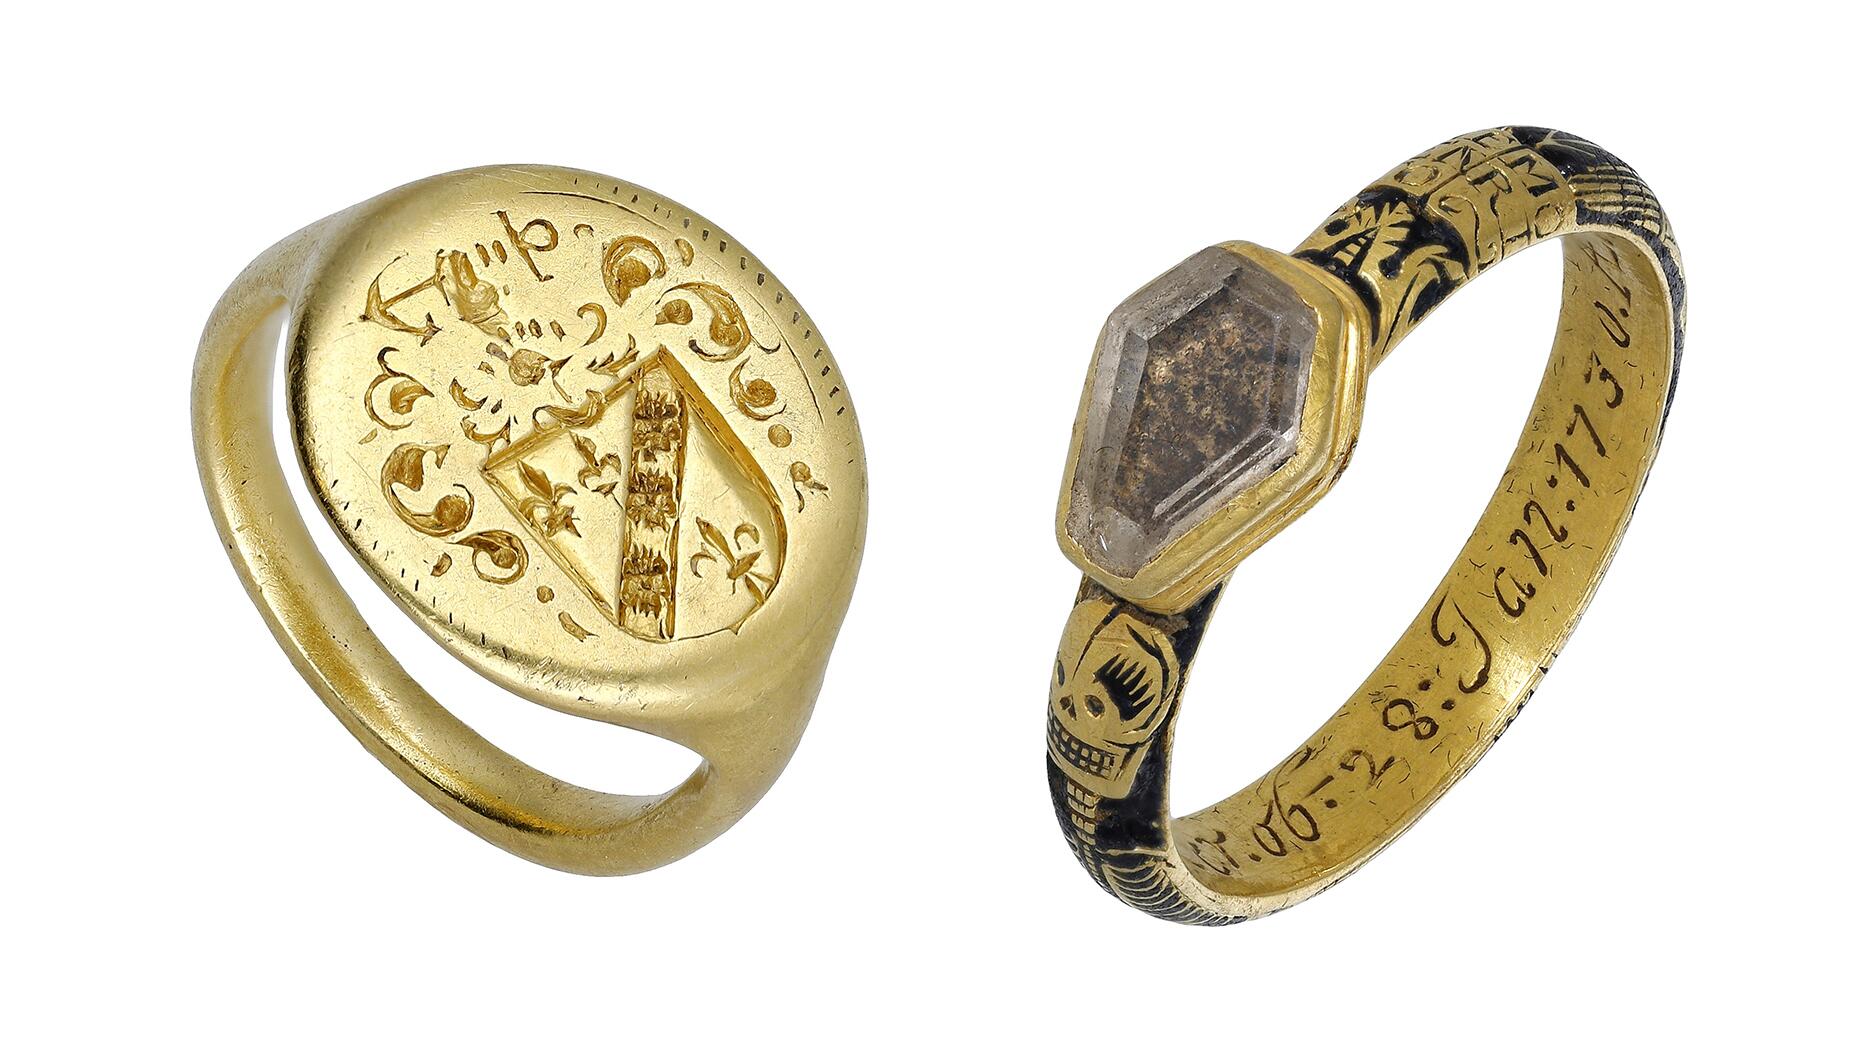 Antique Rings Discovered by Retirees Perform Well at Auction